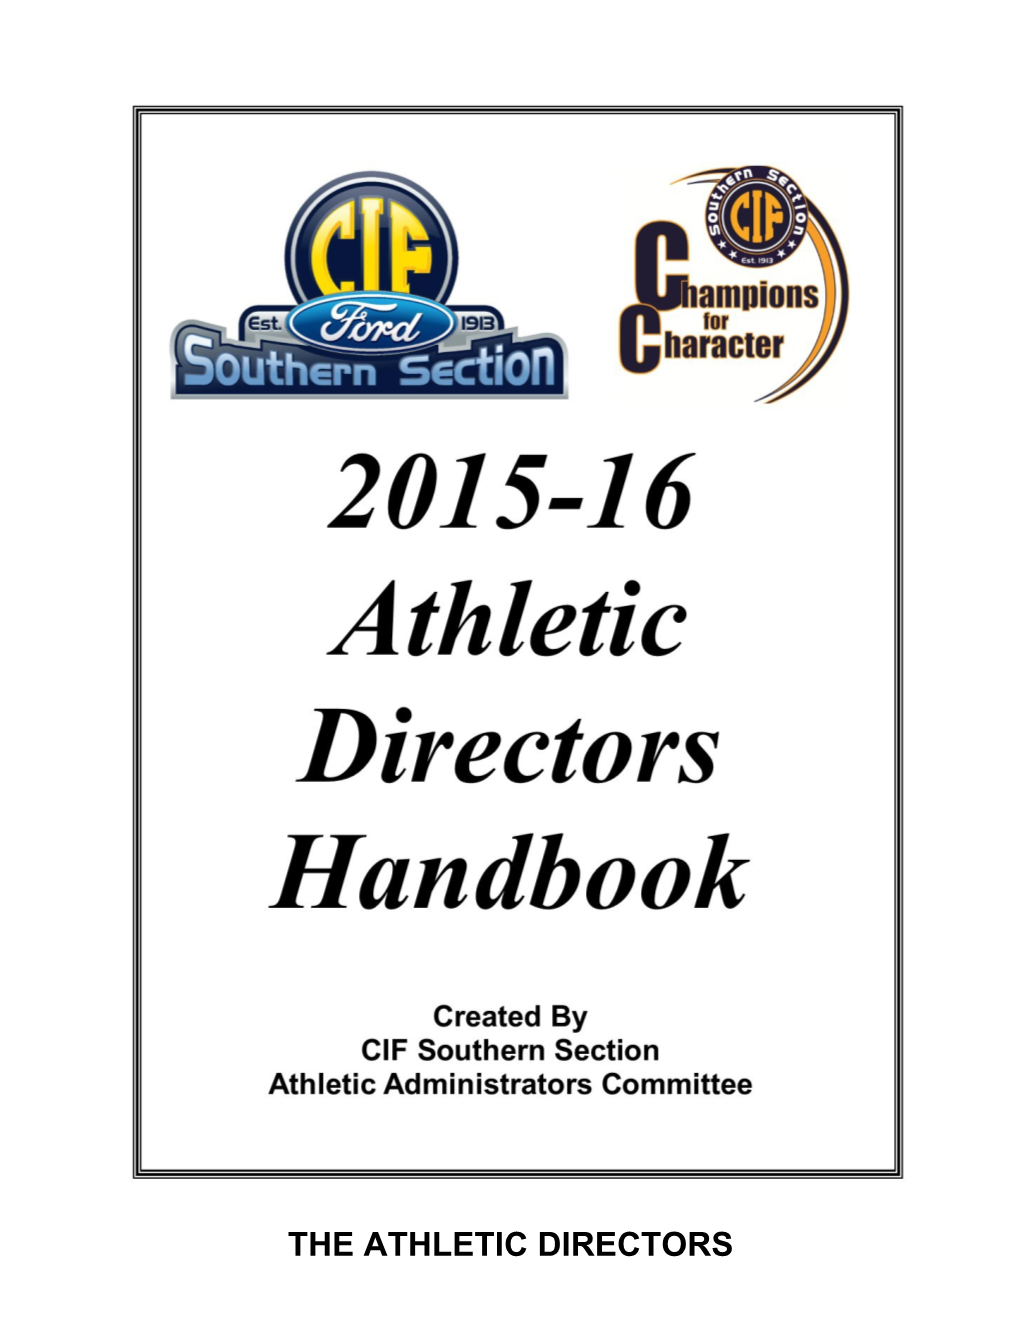 The Athletic Directors